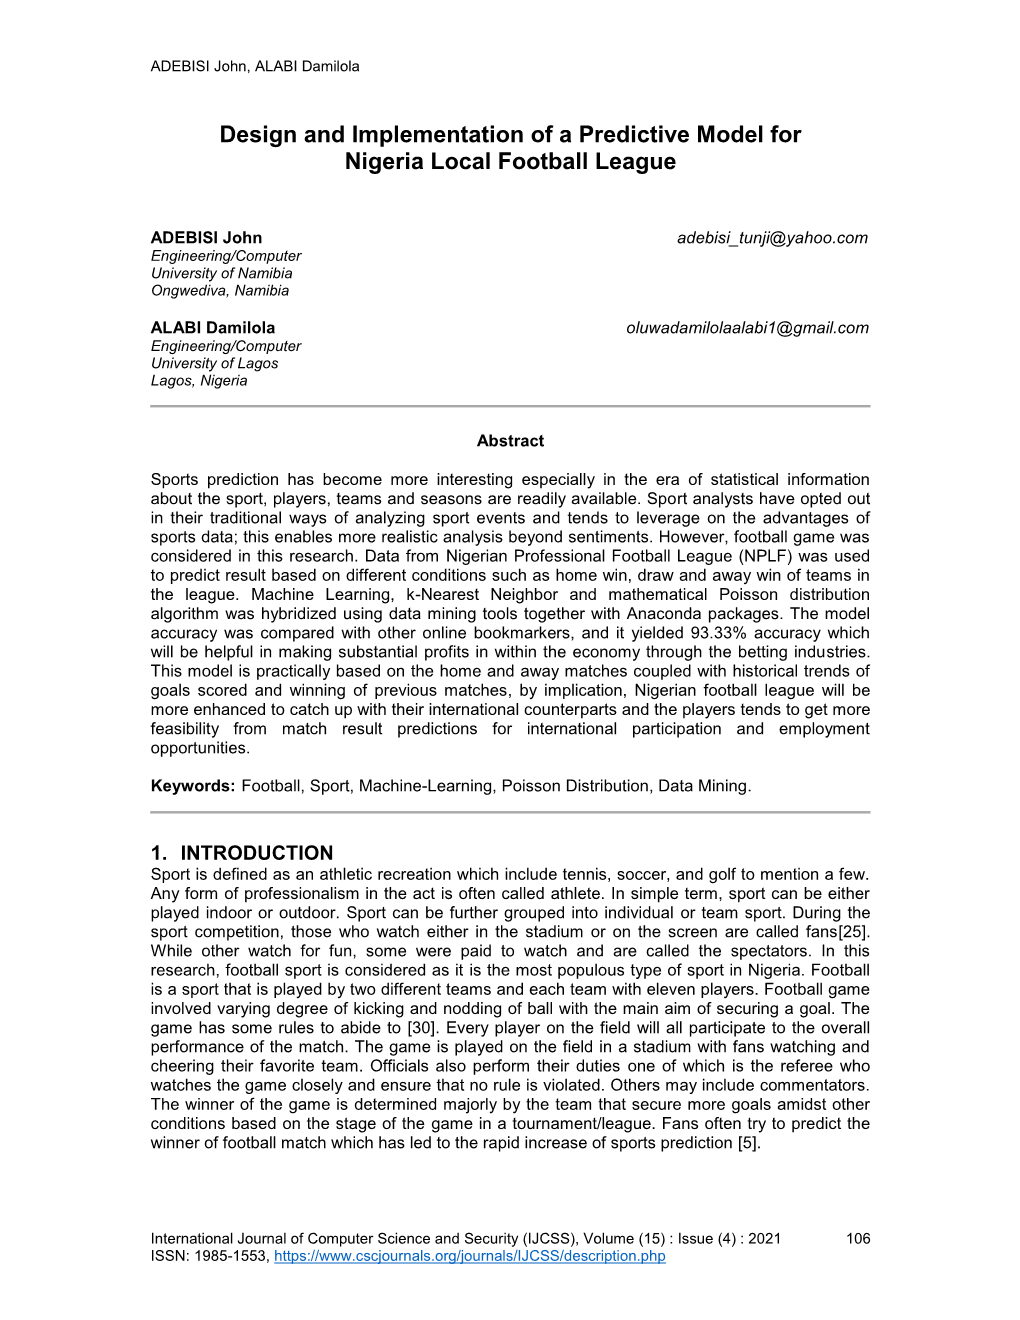 Design and Implementation of a Predictive Model for Nigeria Local Football League